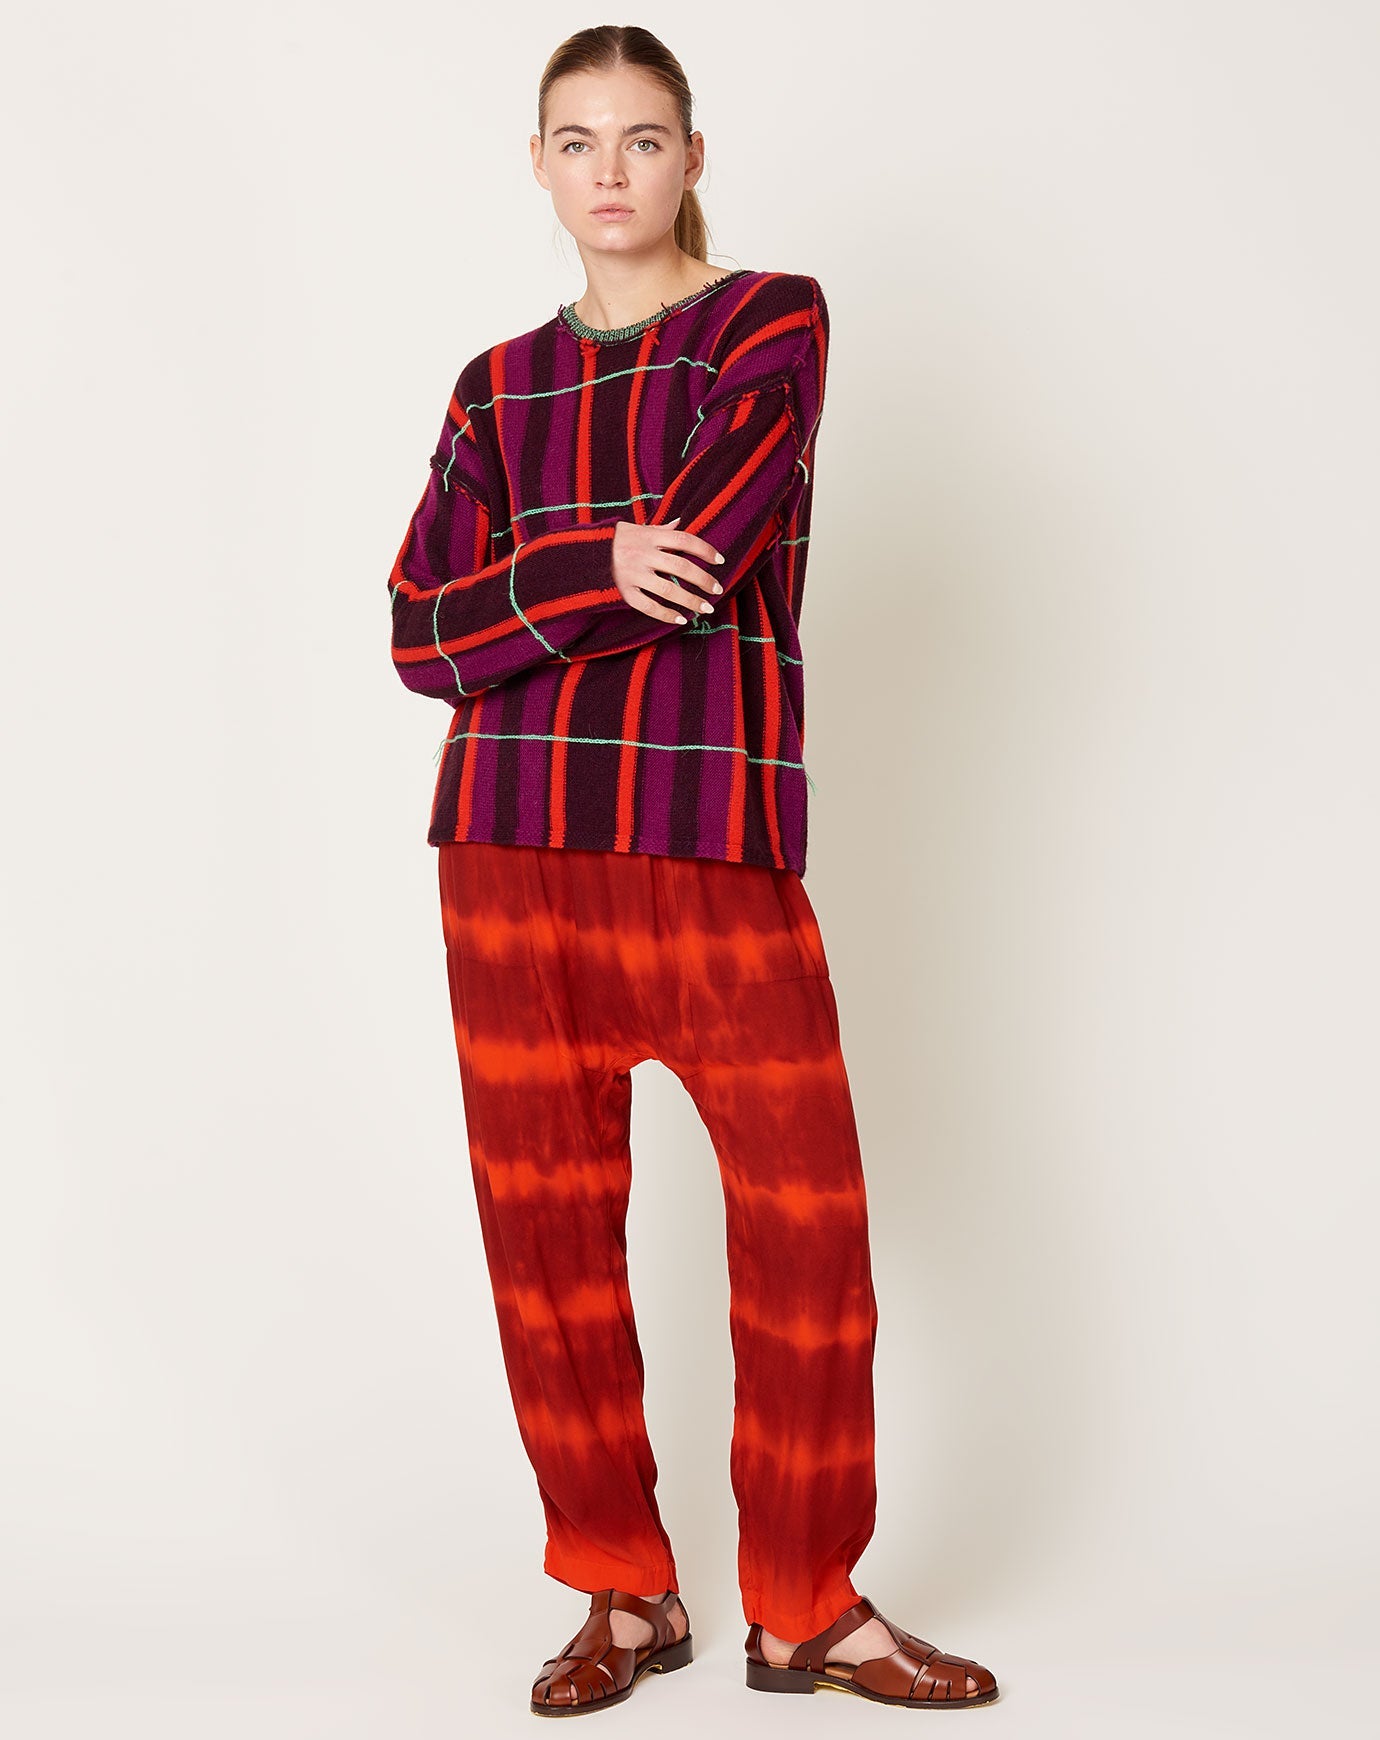 Raquel Allegra Sunday Pant in Fire and Stripes Tie Dye